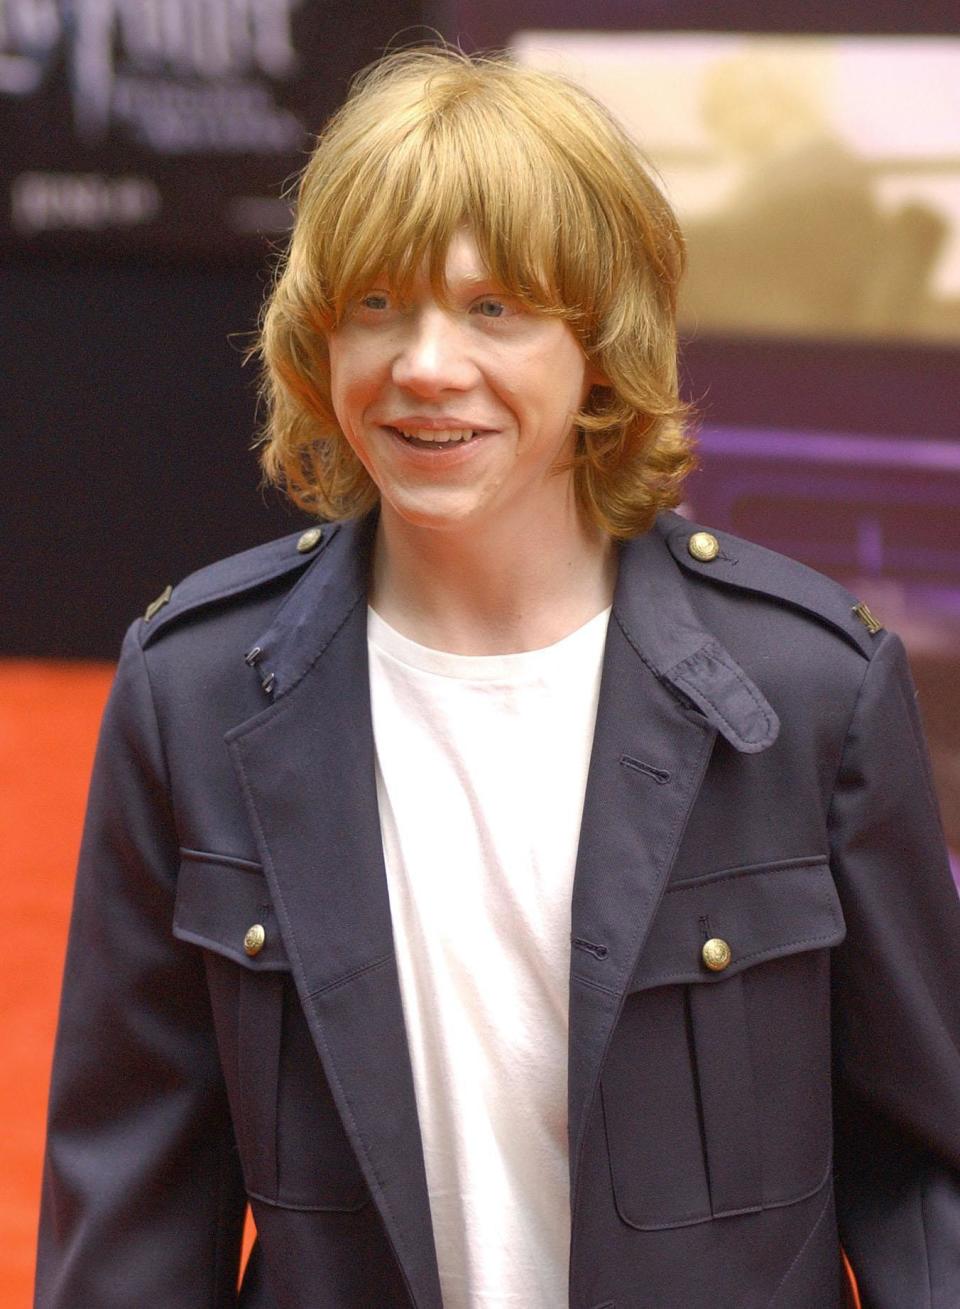 Rupert Grint (who plays Ron Weasley) arrives for the World Premiere of Harry Potter and the Prisoner of Azkaban at Radio City Music Hall in New York.